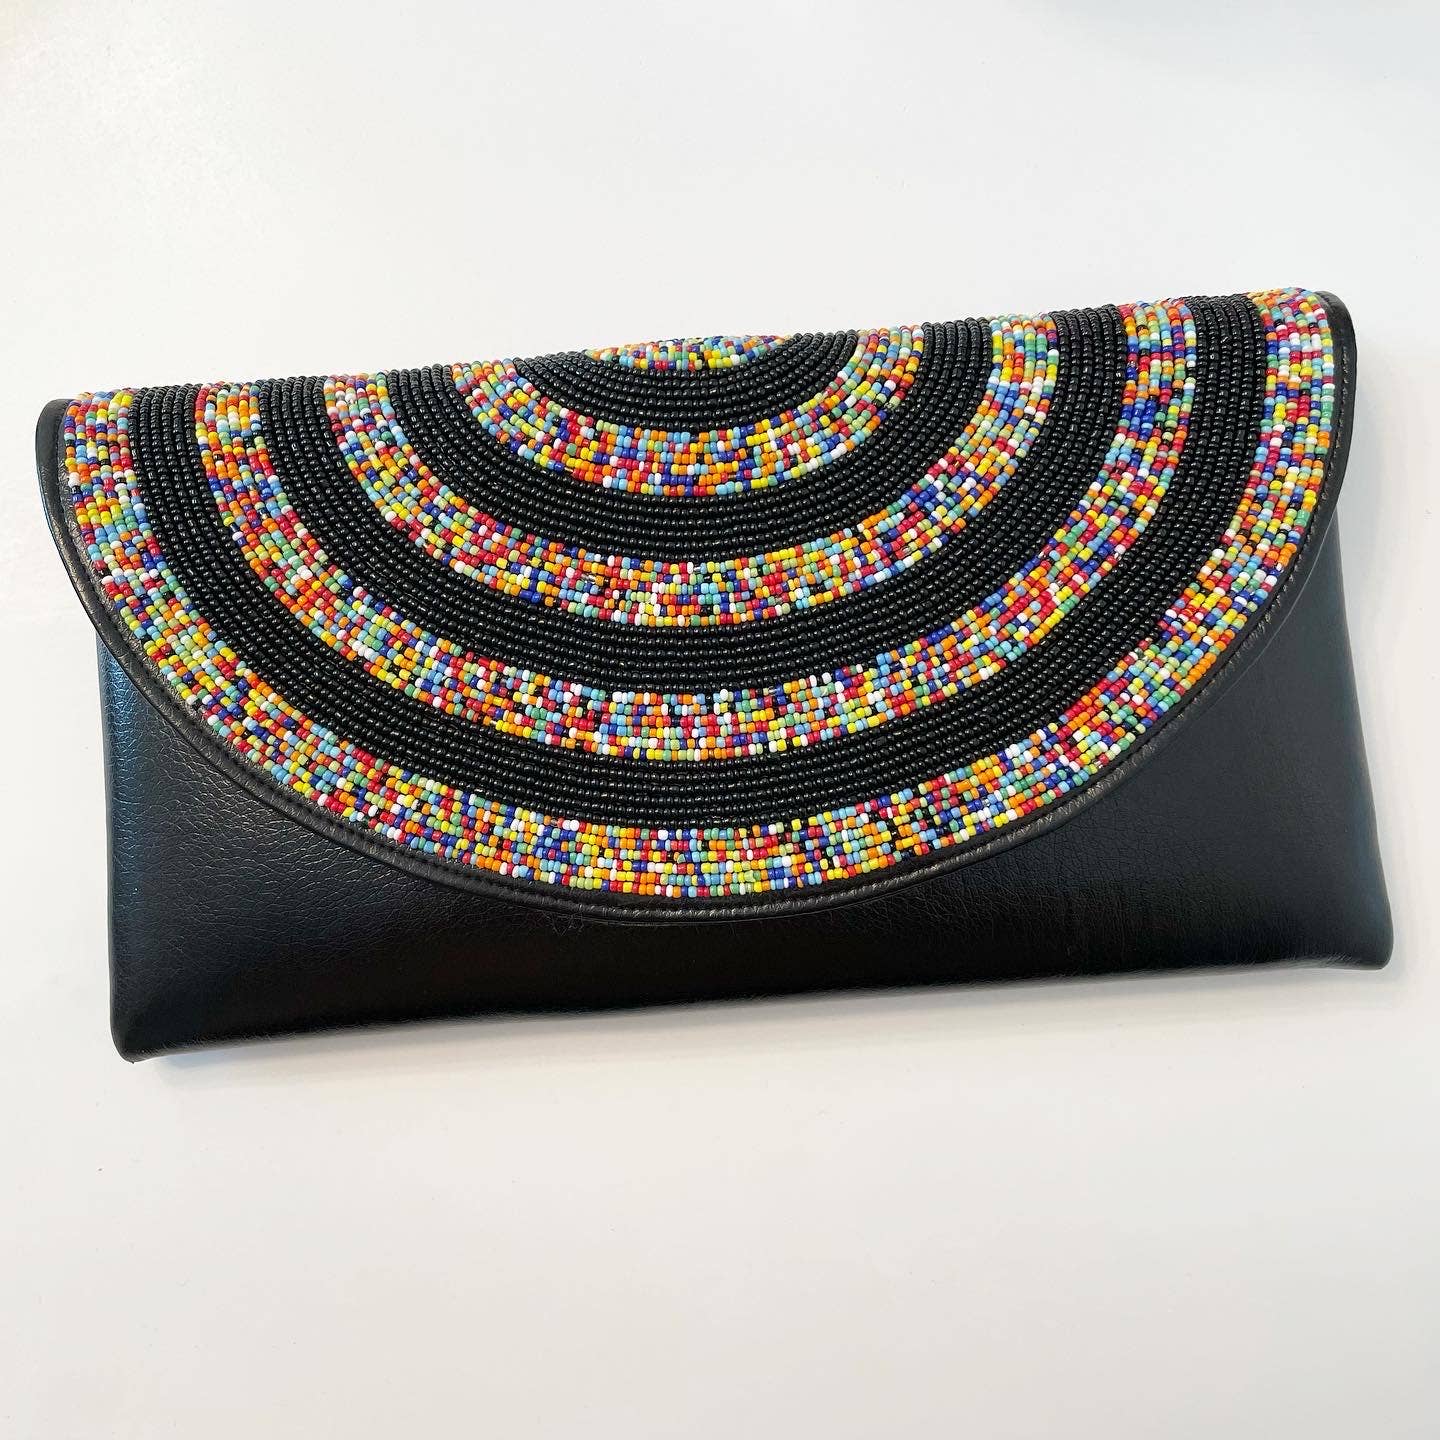 African Leather Rainbow Beads Clutch Purse Bag